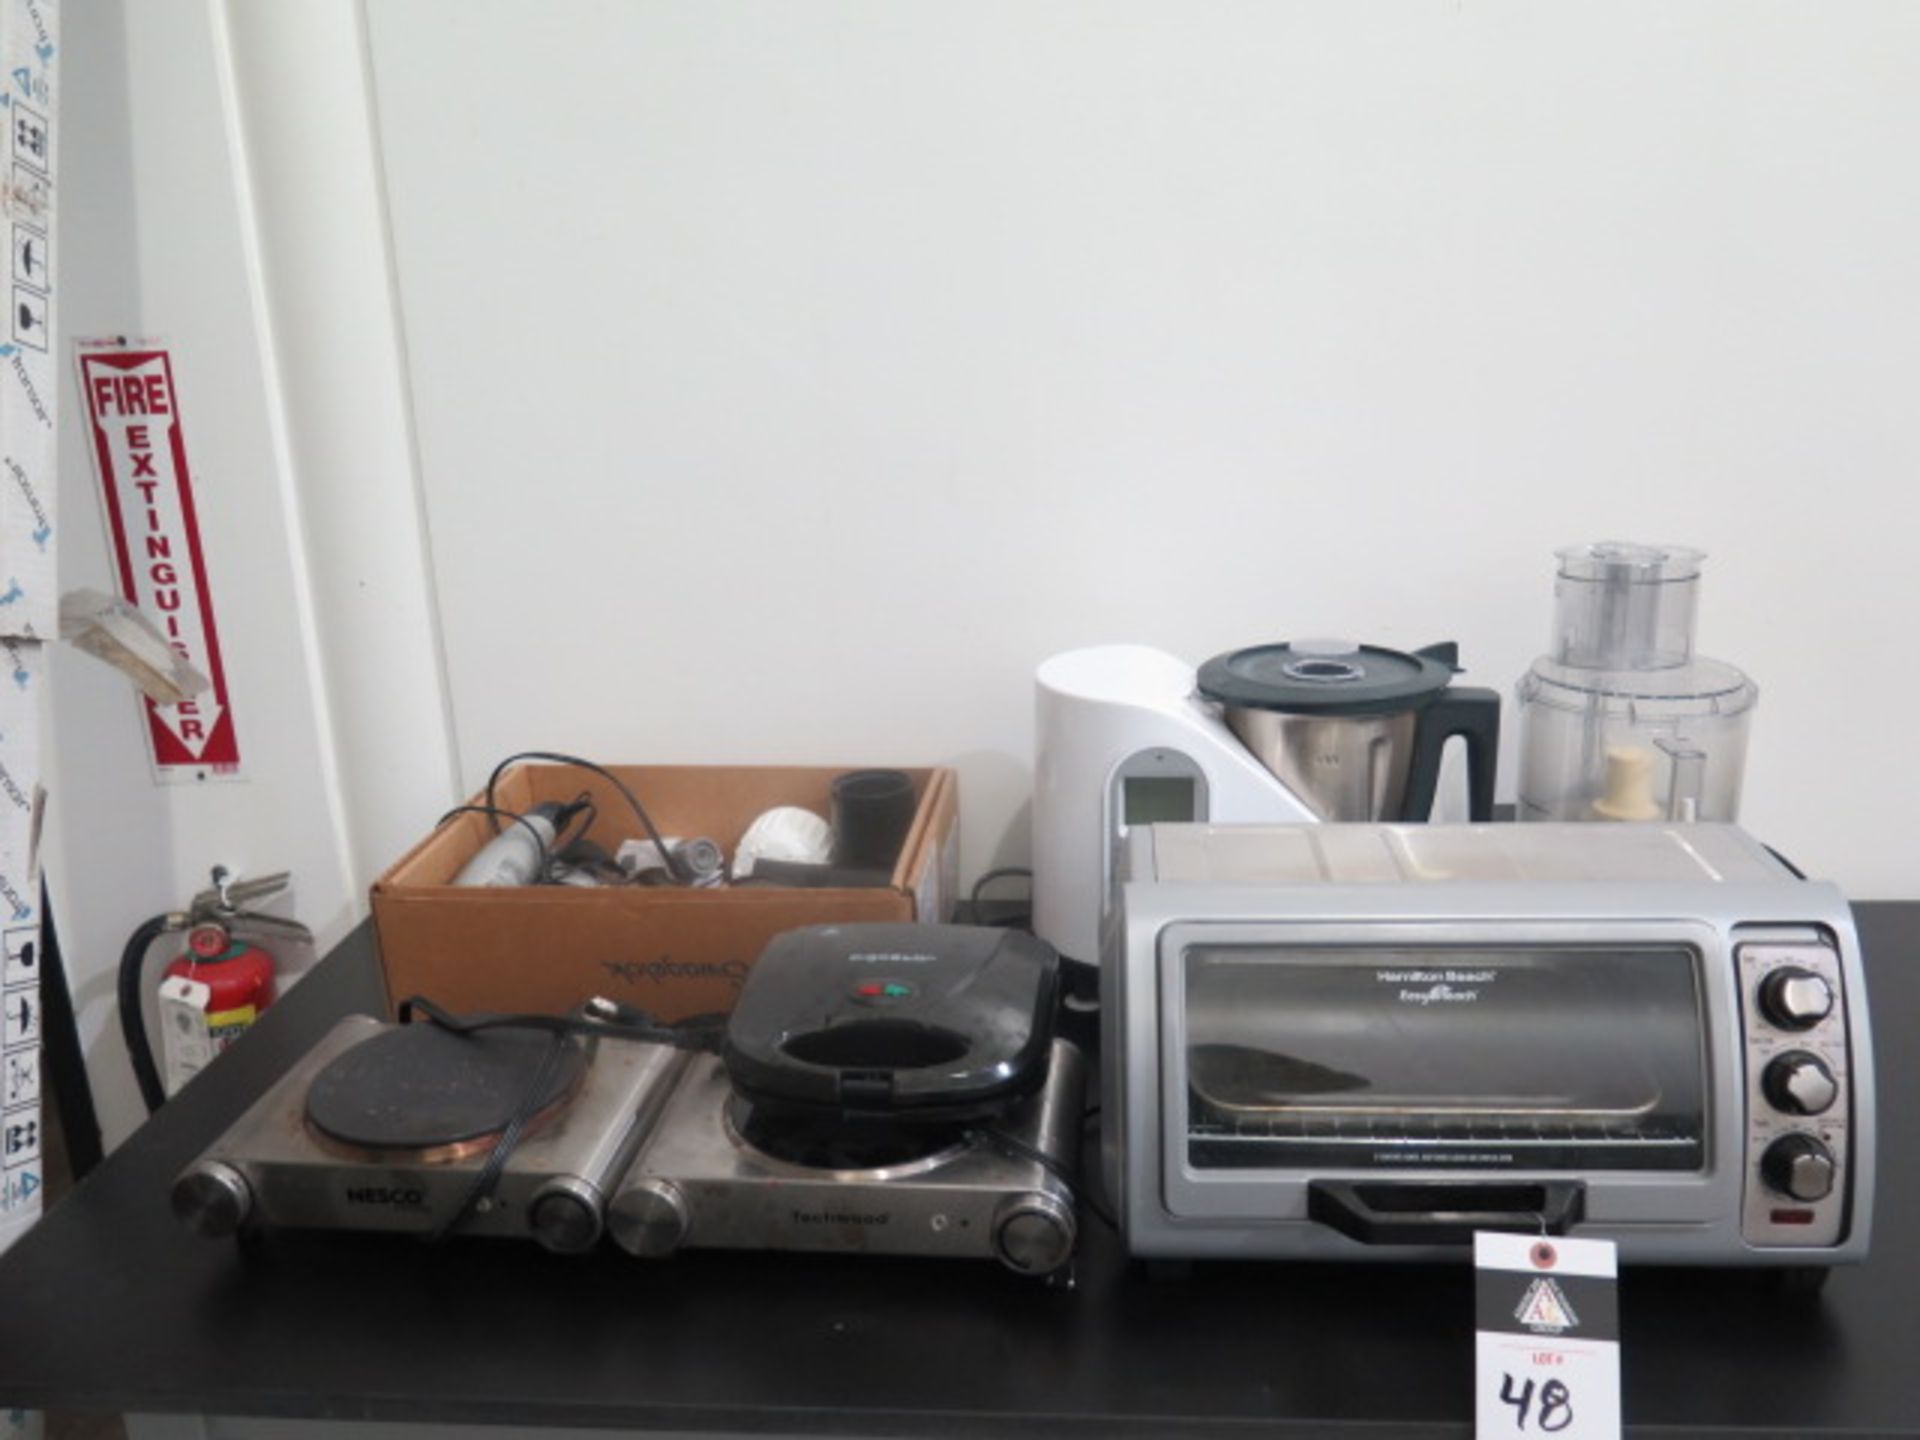 Lab Grade Food Processors, Toaster Oven, Hot Plates, and Misc (NOT FOOD GRADE) (SOLD AS-IS - NO